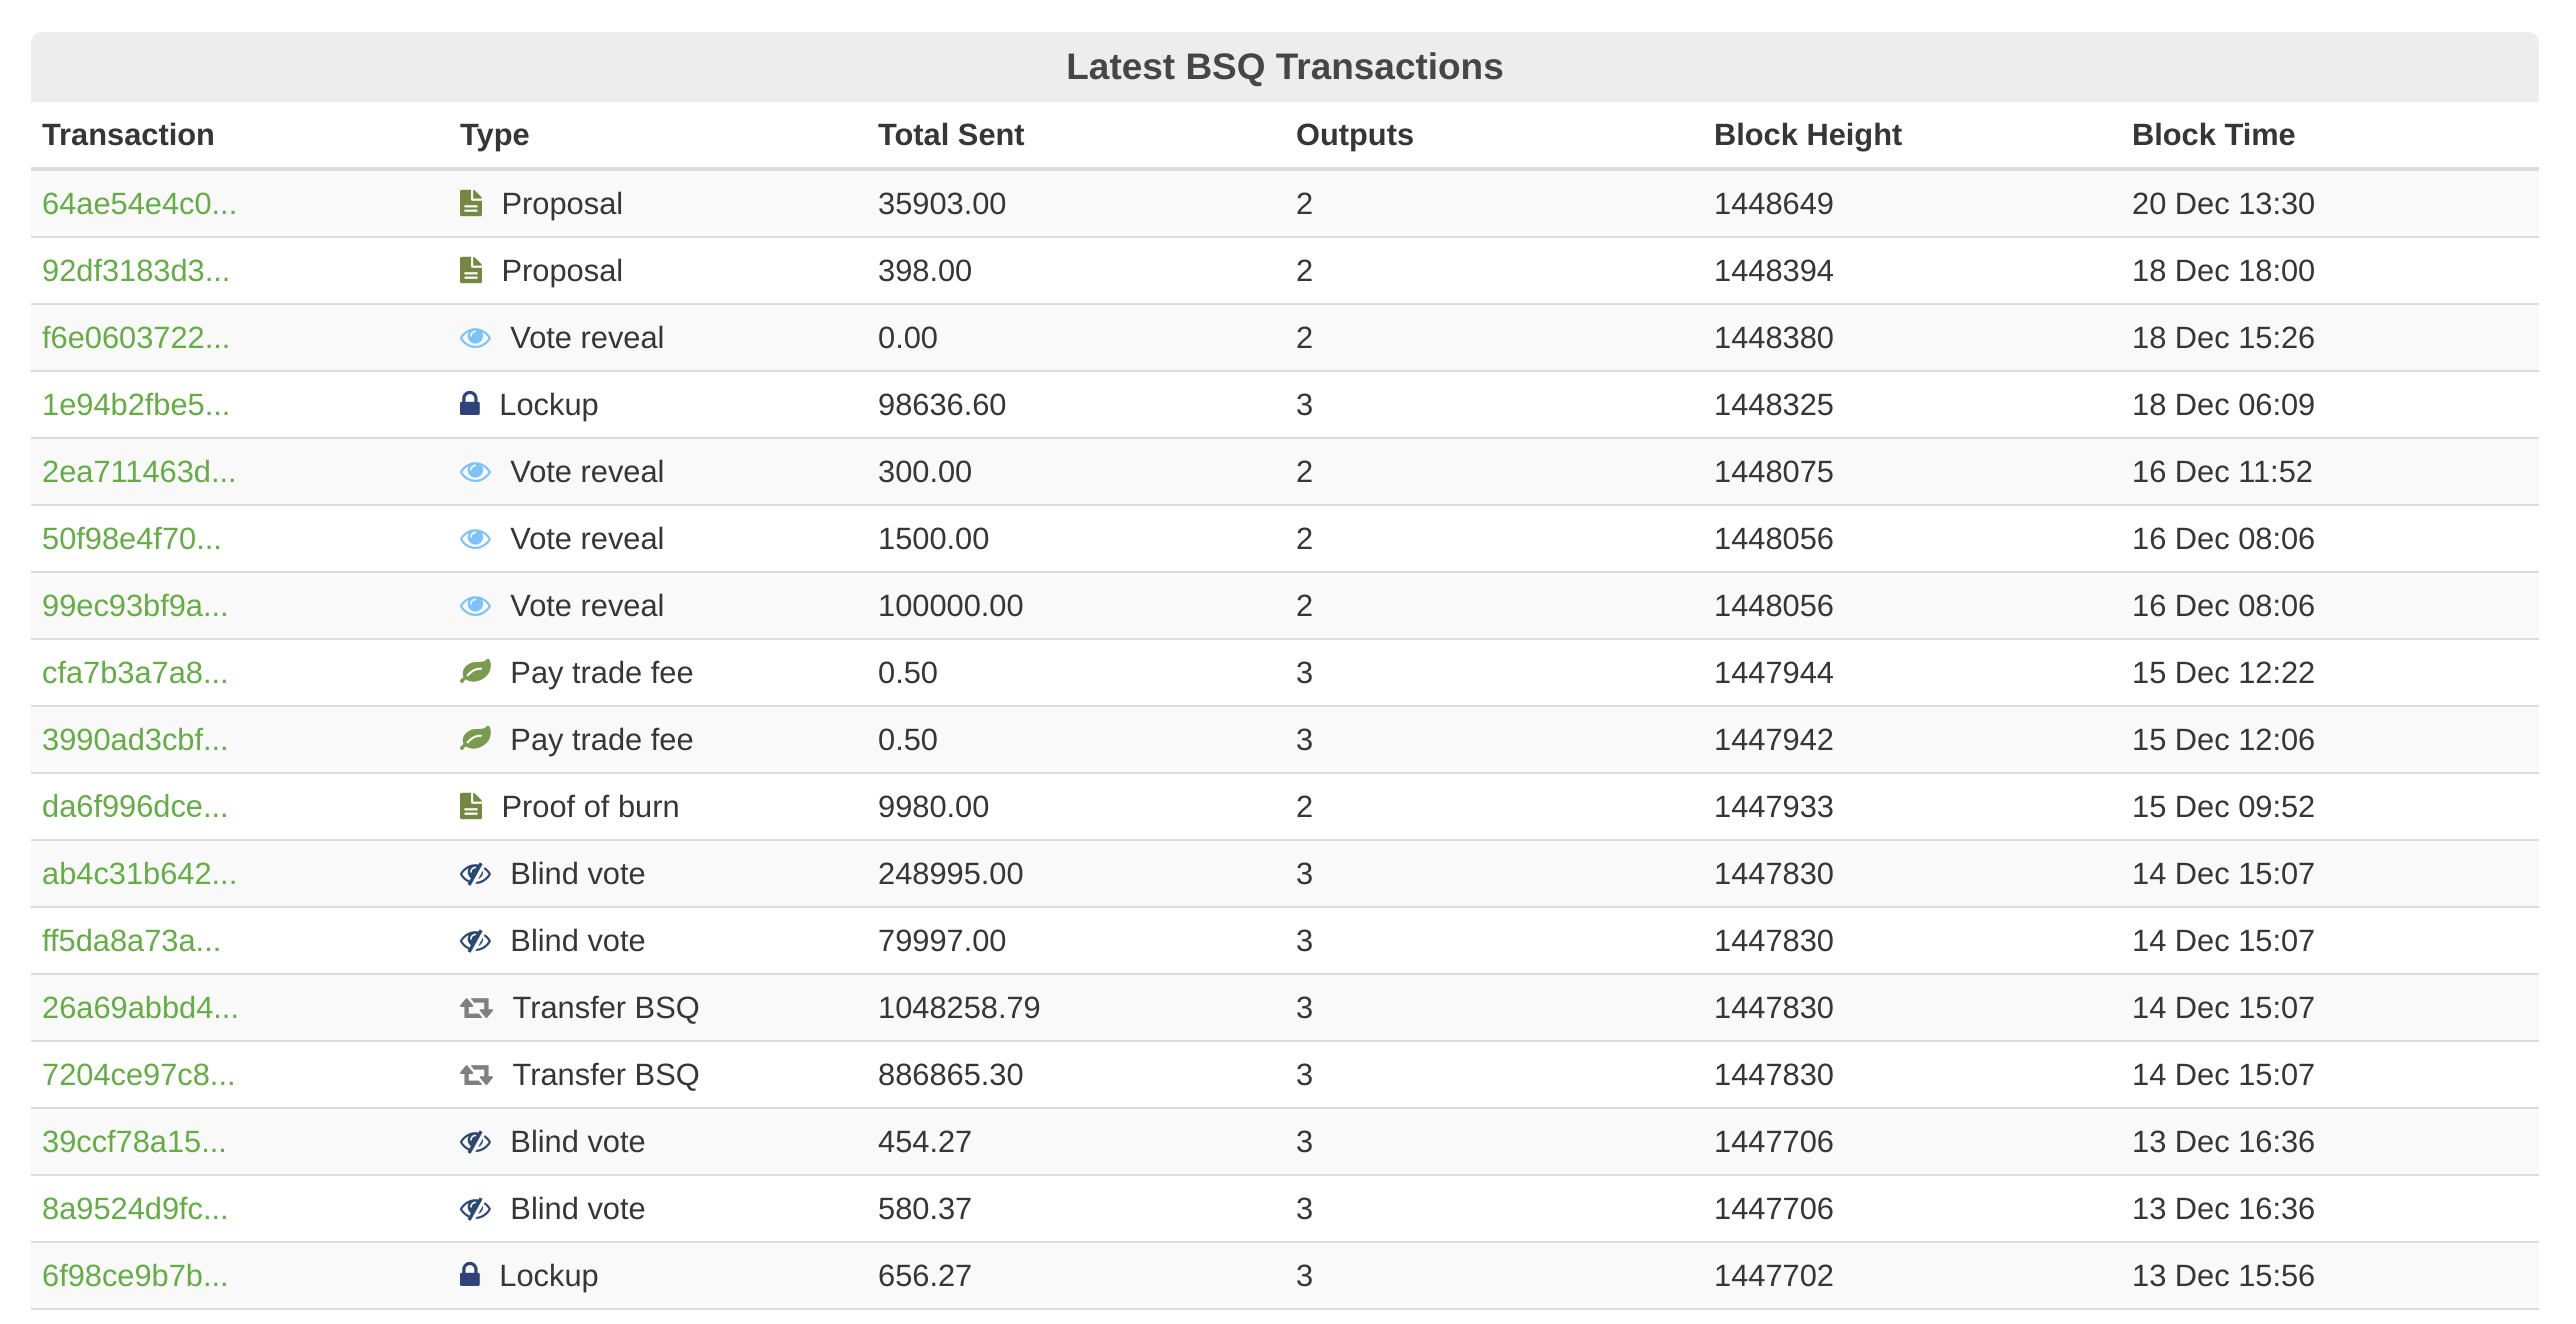 Some recent BSQ transactions